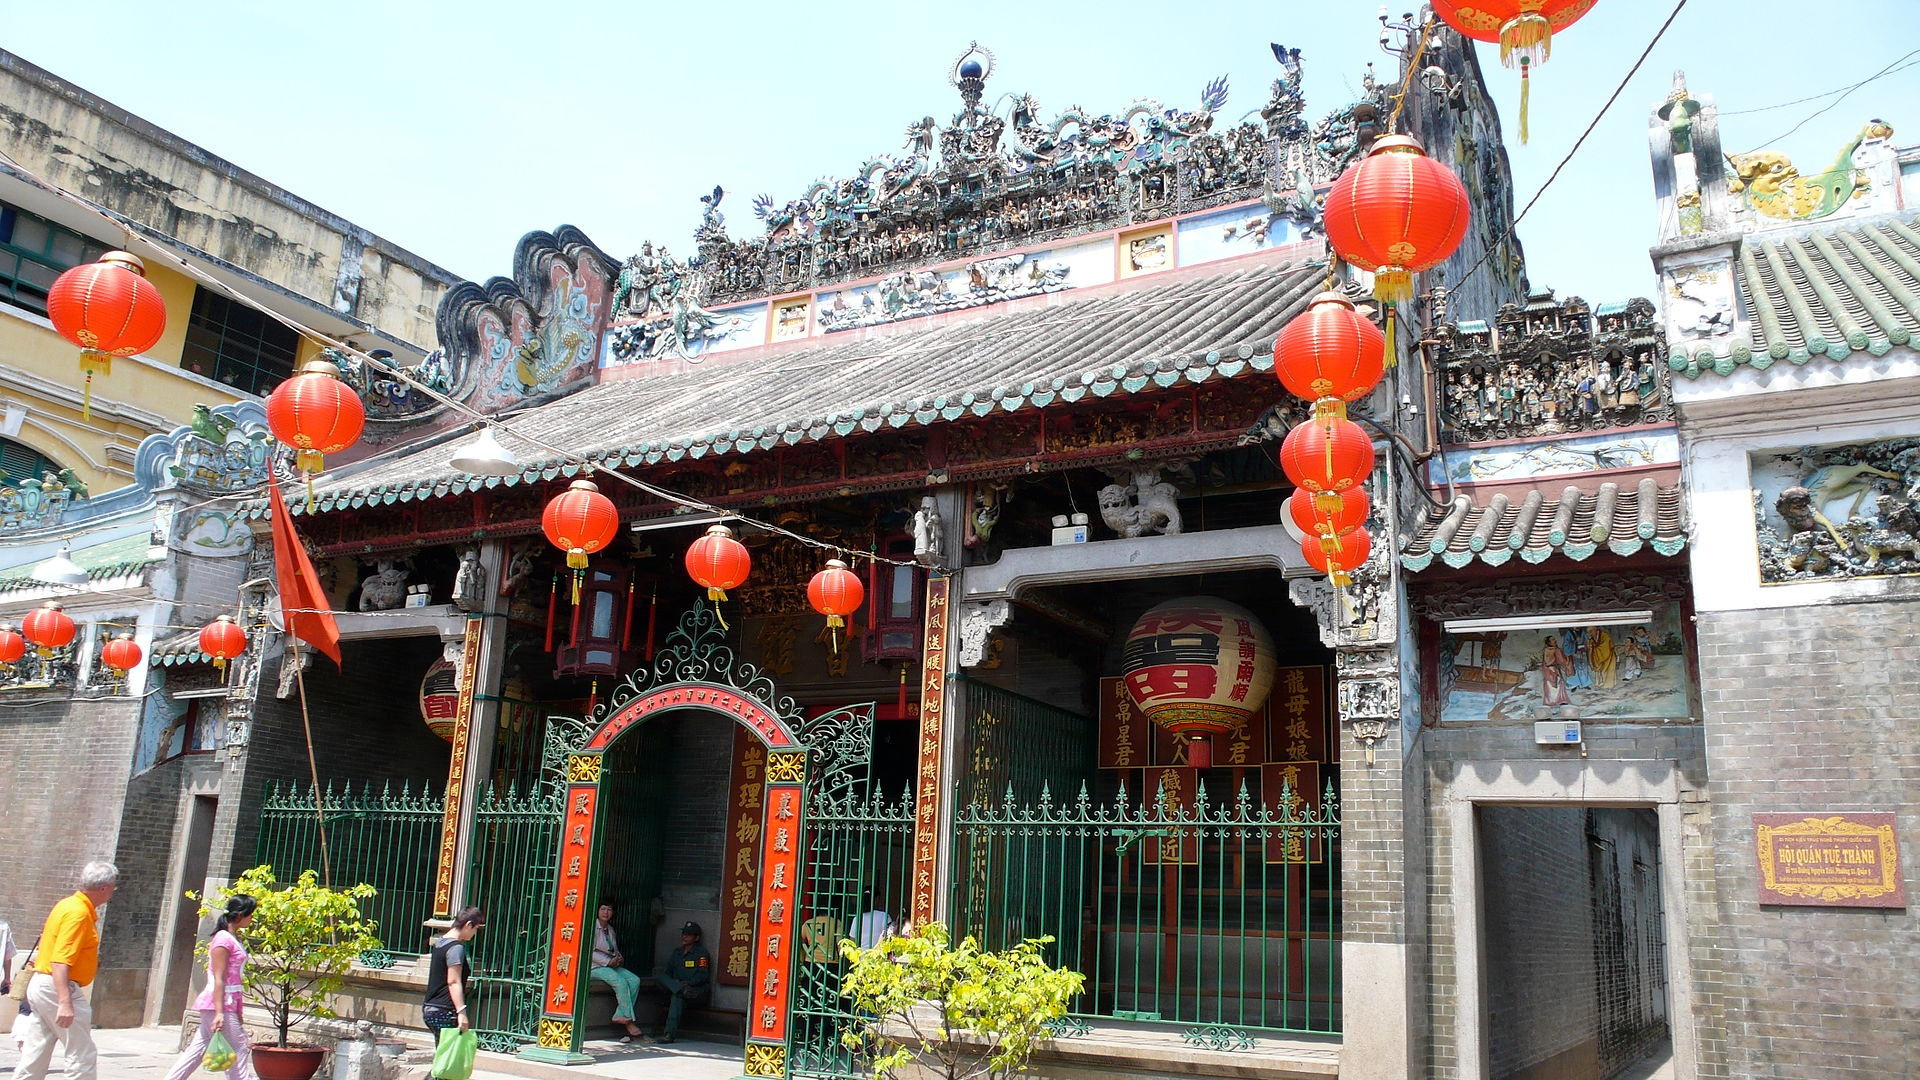 By Christopher from Shanghai, China - Chinese Temple in Saigon, CC BY 2.0, https://commons.wikimedia.org/w/index.php?curid=3942425